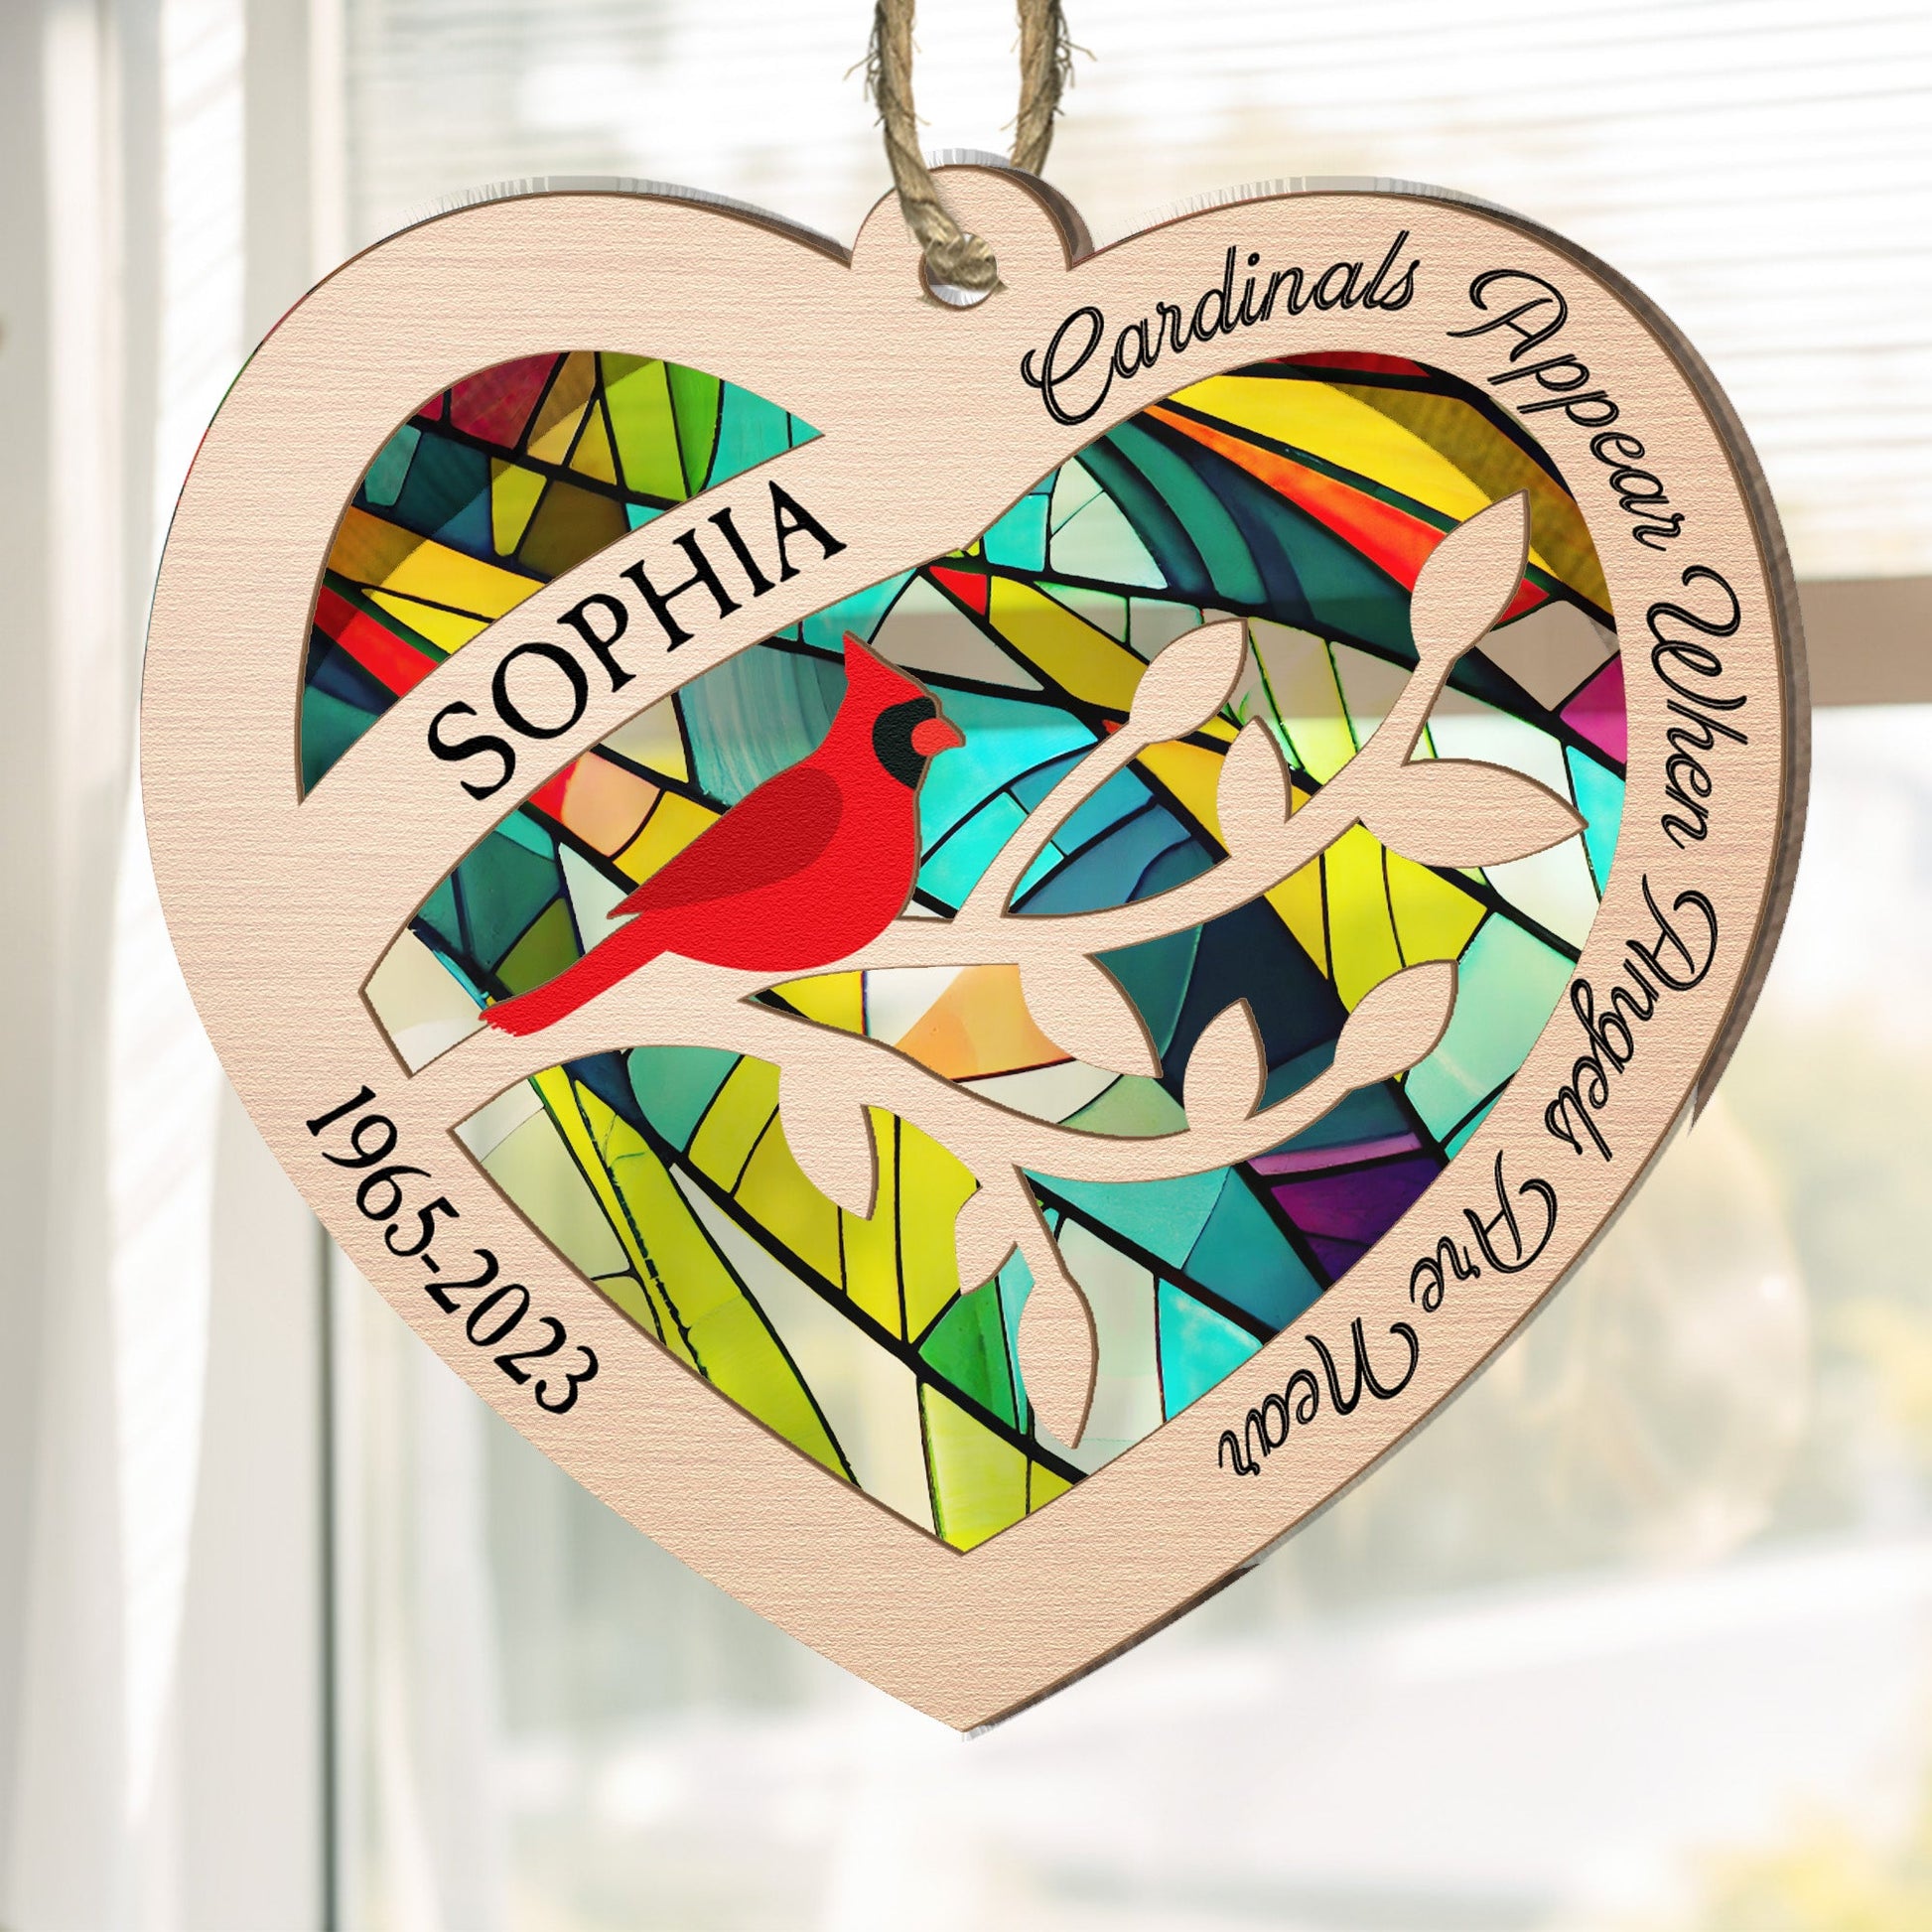 Cardinals Appear When Angels Are Near - Personalized Suncatcher Ornament